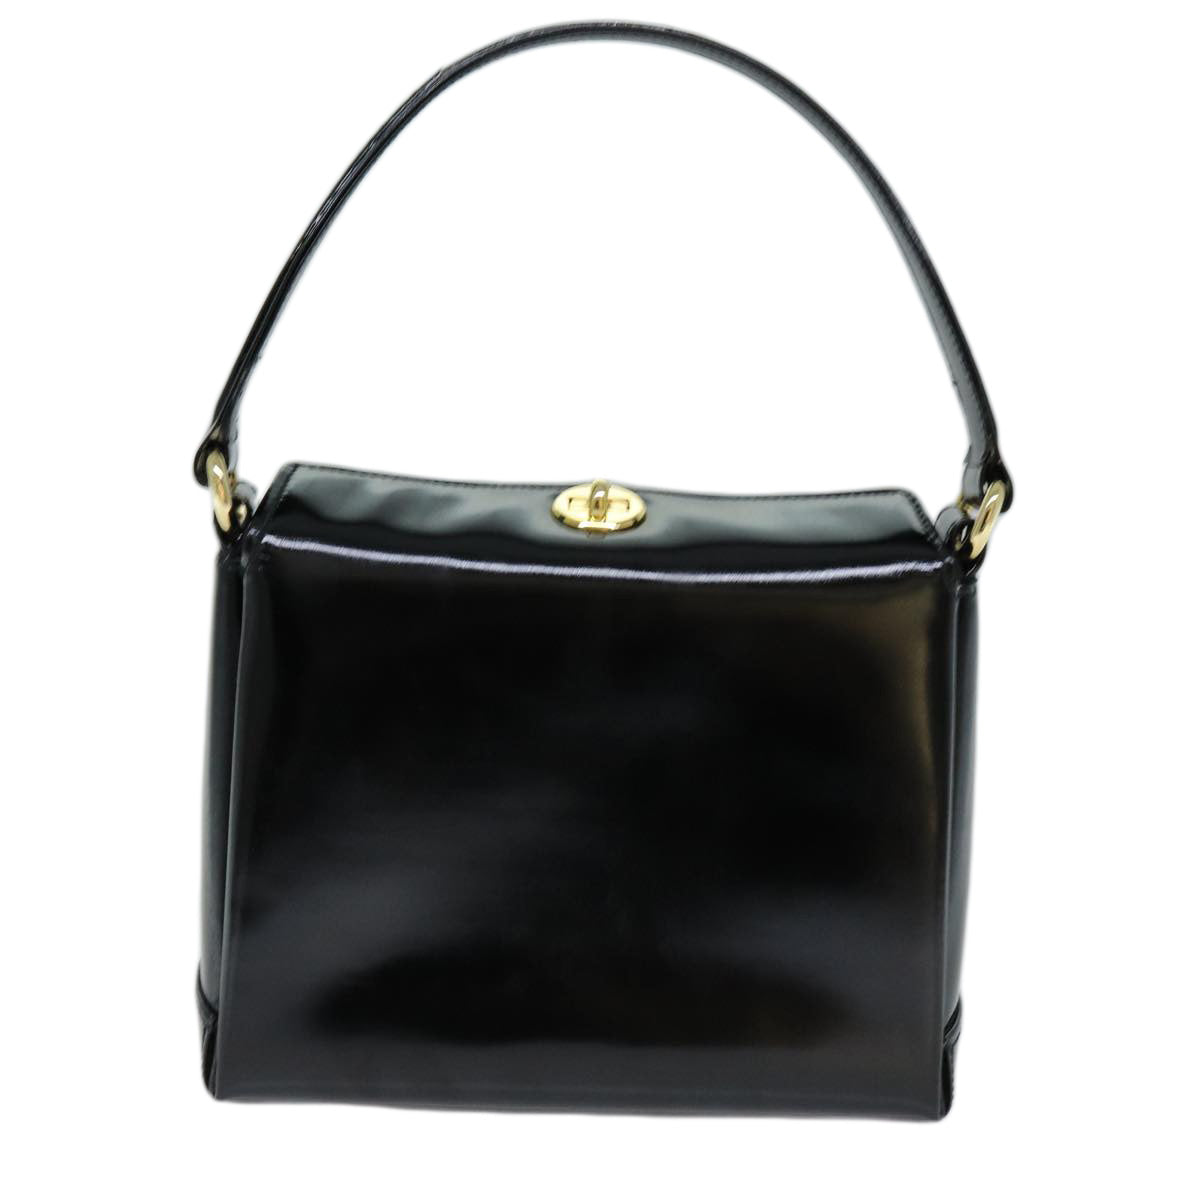 GUCCI Hand Bag Patent leather Black 000 110 0907 Auth 74593 - 0